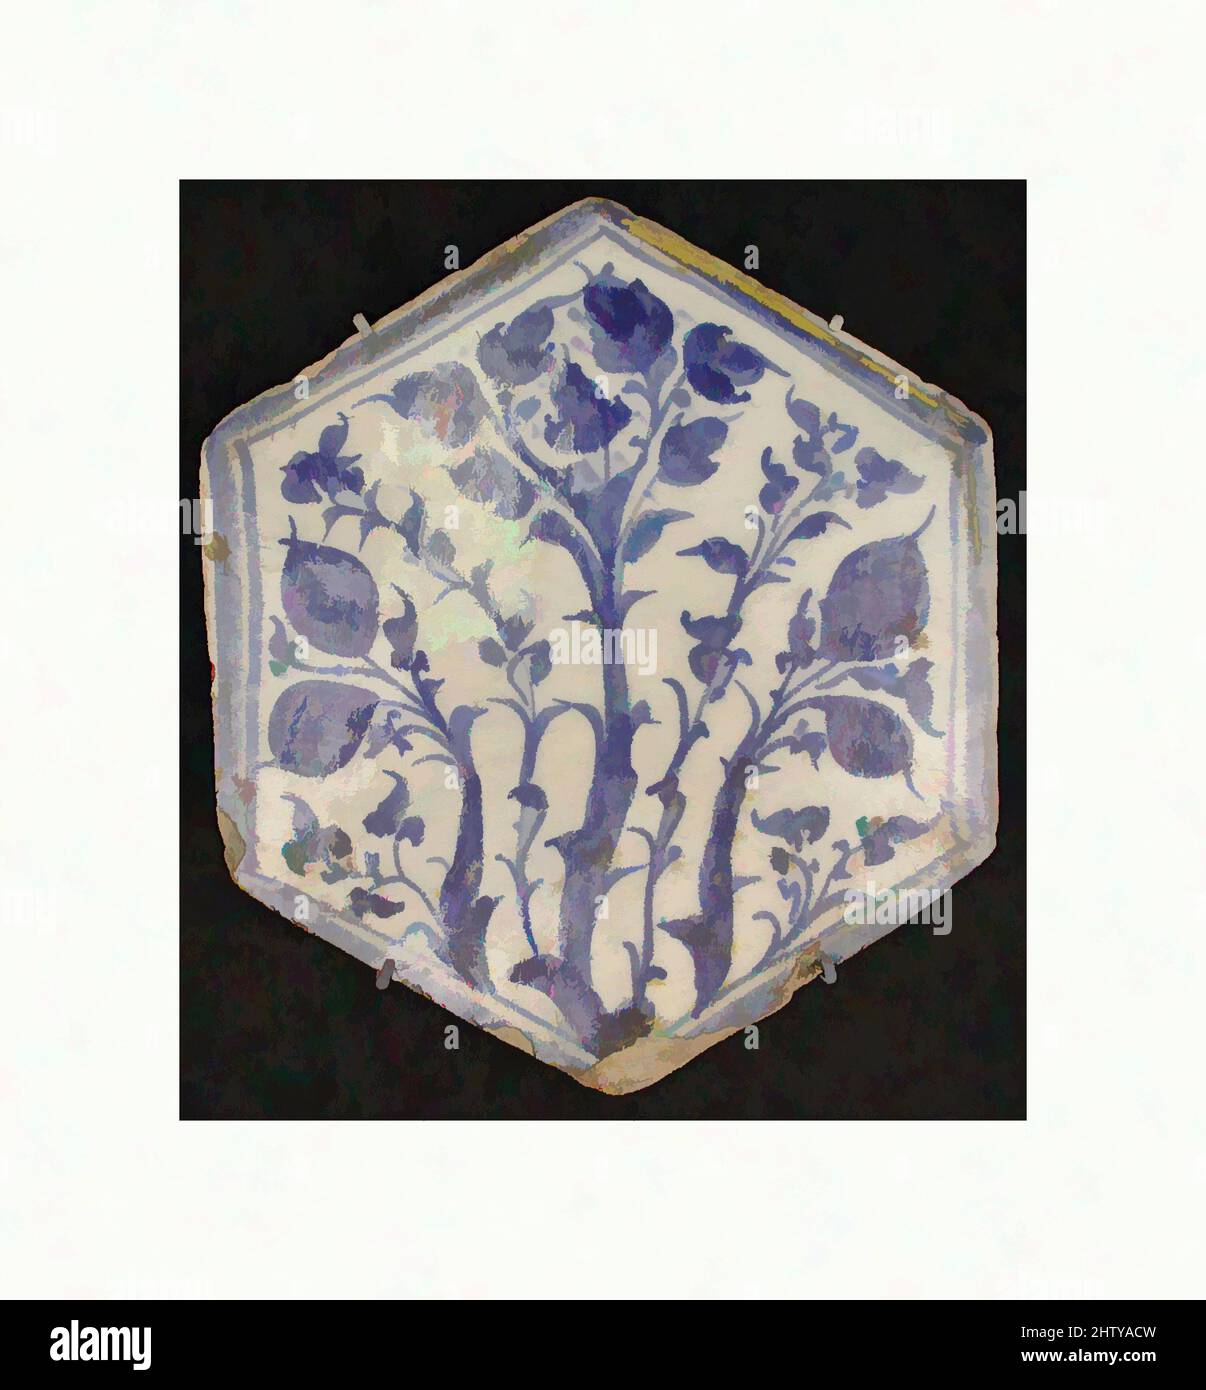 Art inspired by Hexagonal Tile, second half 15th century, Attributed to Egypt, Stonepaste; underglaze painted, Ceramics-Tiles, The design of this tile was strongly influenced by Chinese models, in both composition and color. The Egyptian taste for blue-and-white botanical designs was, Classic works modernized by Artotop with a splash of modernity. Shapes, color and value, eye-catching visual impact on art. Emotions through freedom of artworks in a contemporary way. A timeless message pursuing a wildly creative new direction. Artists turning to the digital medium and creating the Artotop NFT Stock Photo